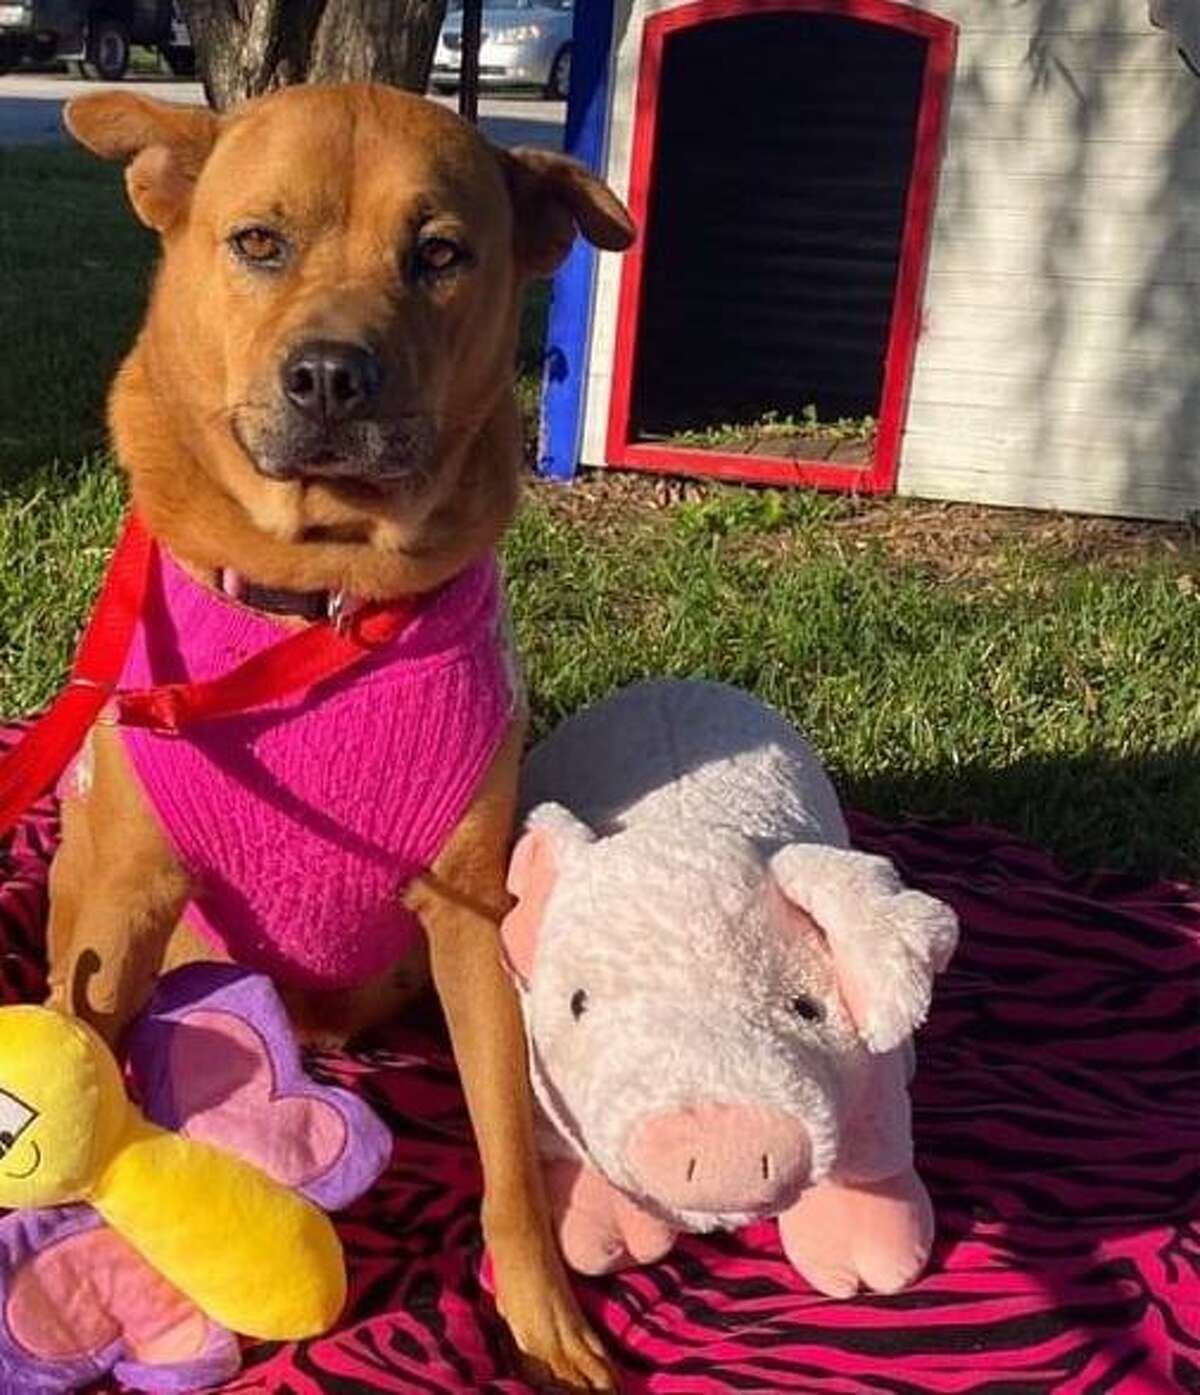 Fort Bend County Animal Services plans to host “Howl-o-ween” on Saturday, Oct. 31, and Sunday, Nov. 1. The family-friendly event will include a haunted house, a pumpkin patch and adoptable pets like Eve, pictured here.